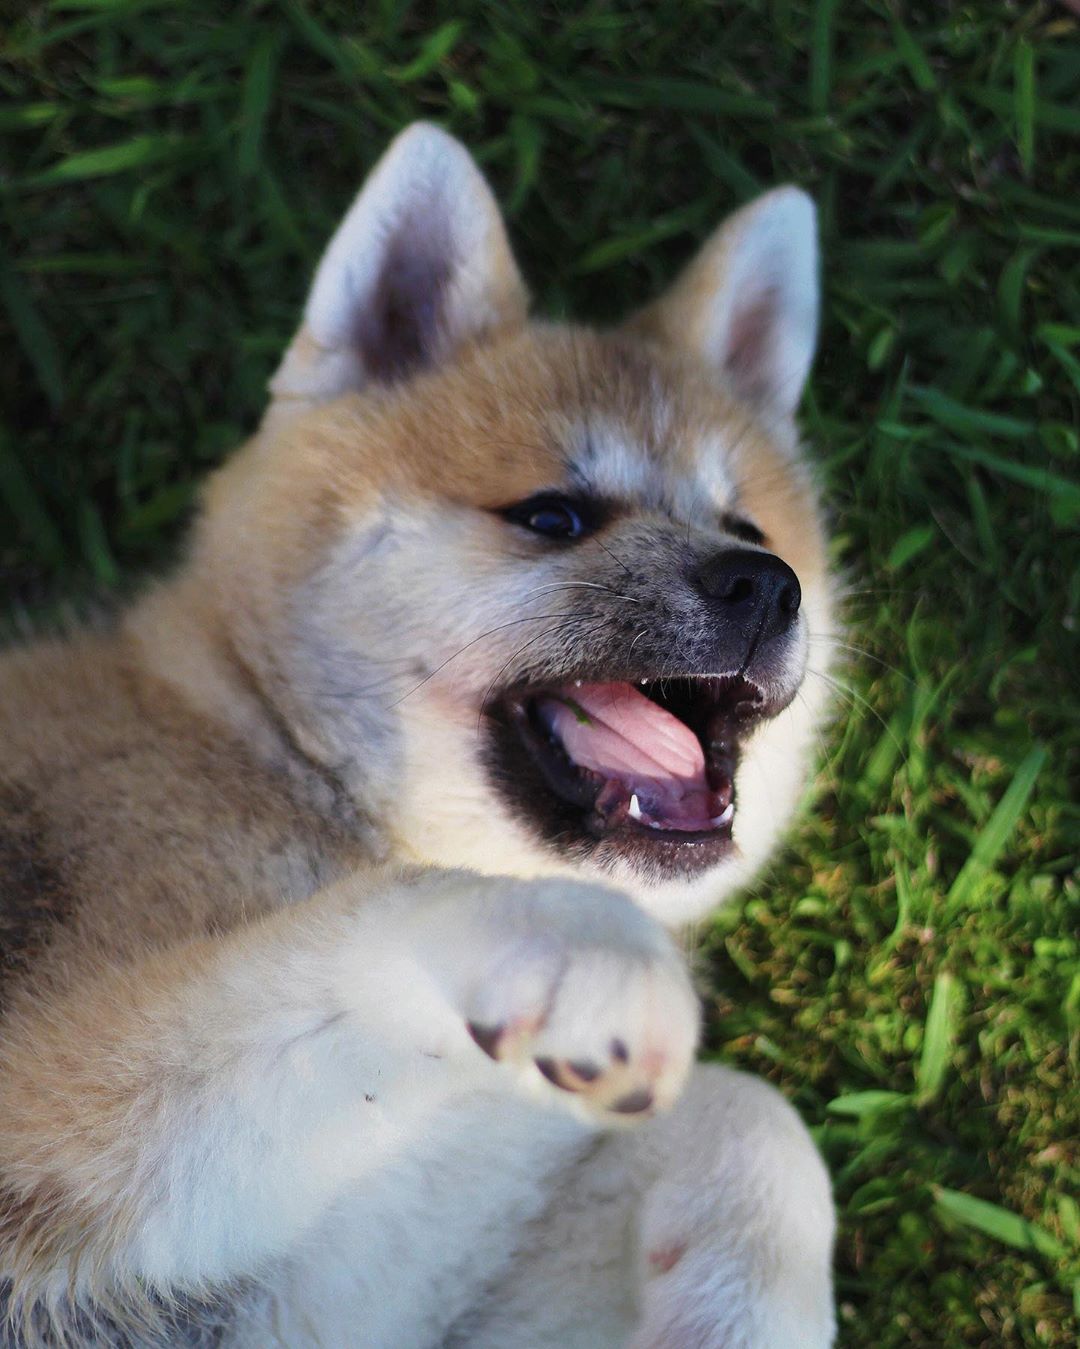 An Akita Inu lying on the grass with its mouth open